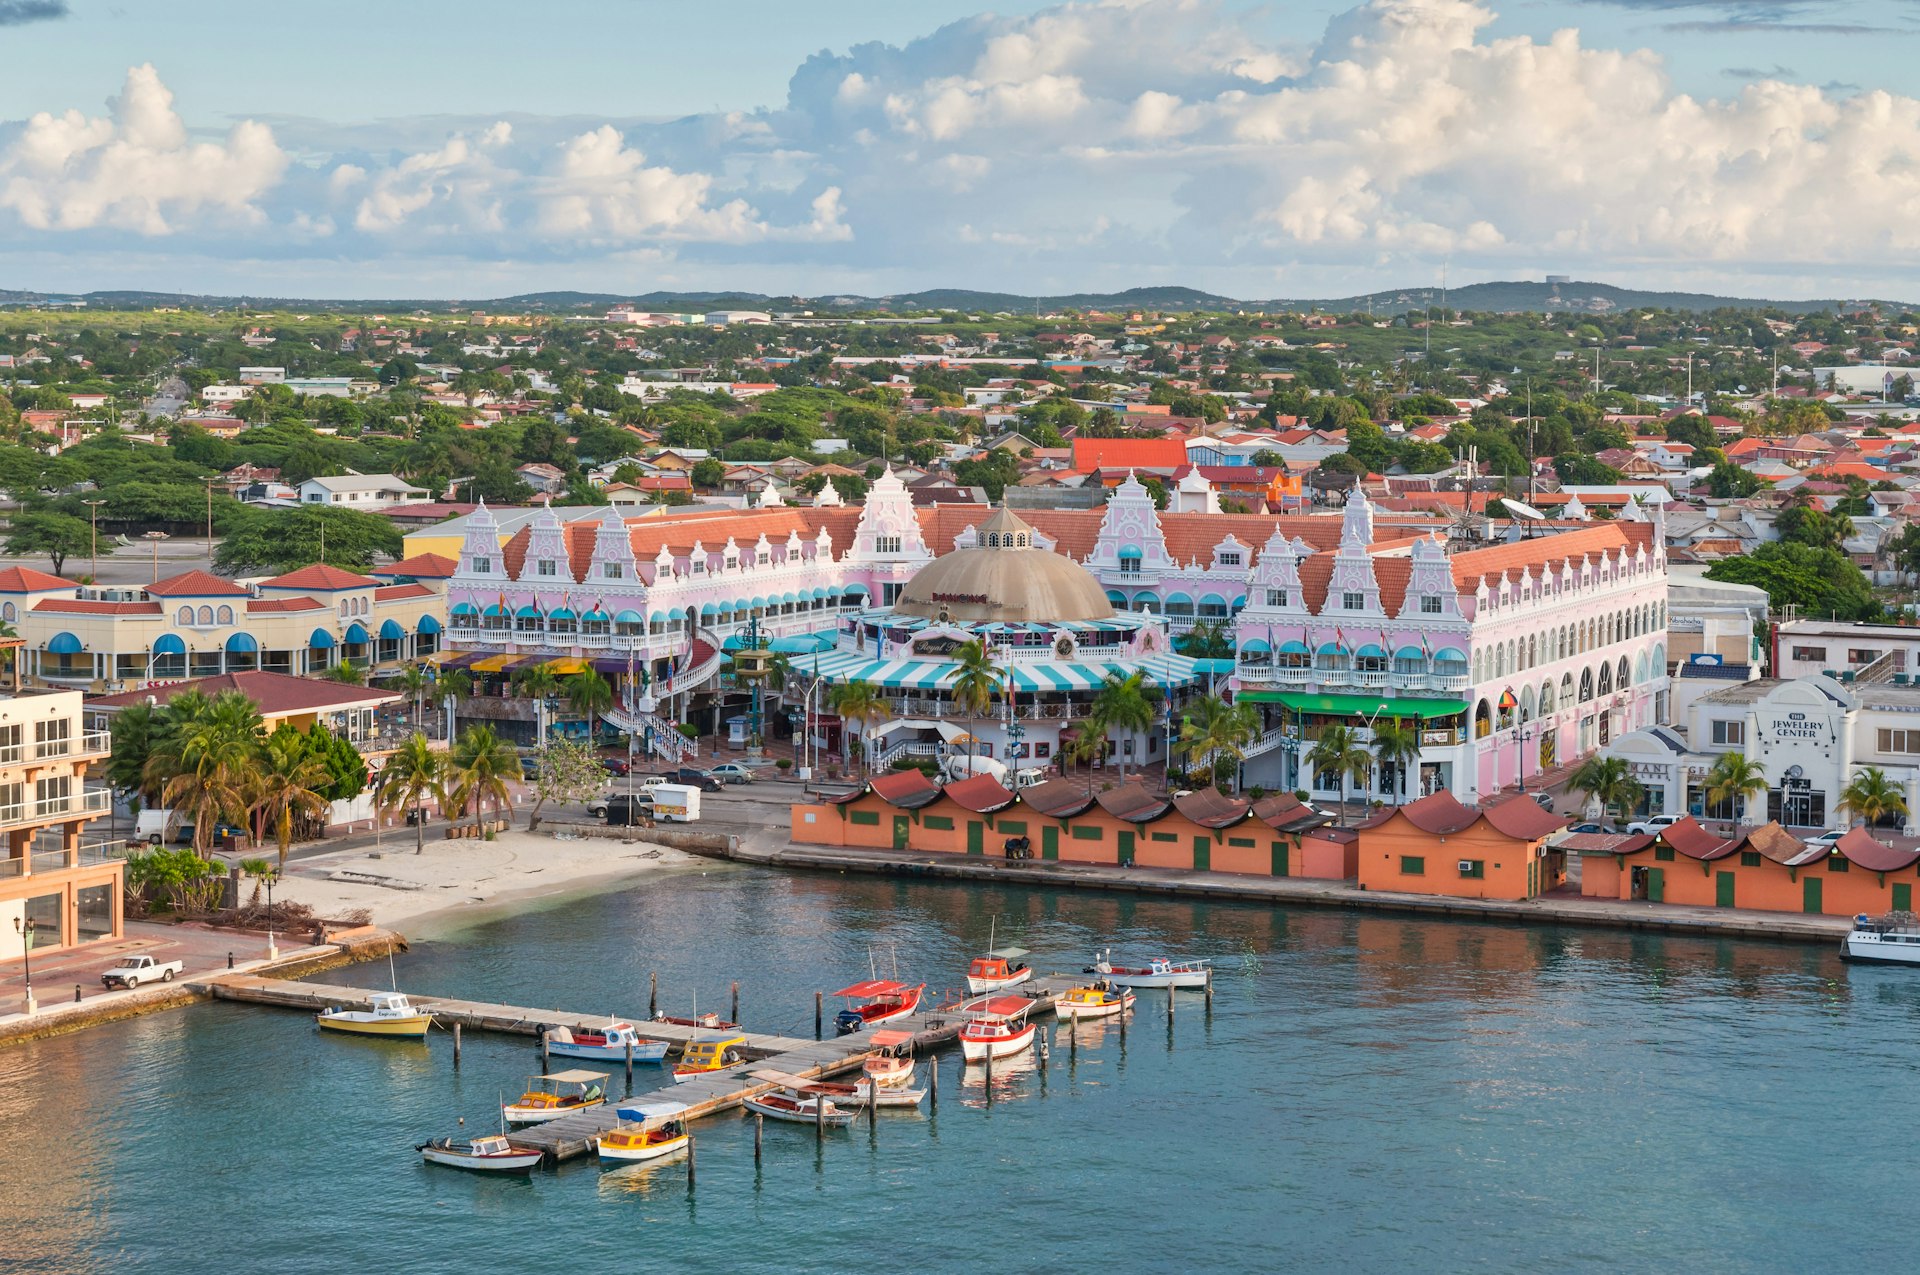 View from above of colorful buildings in Oranjestad on the island of Aruba